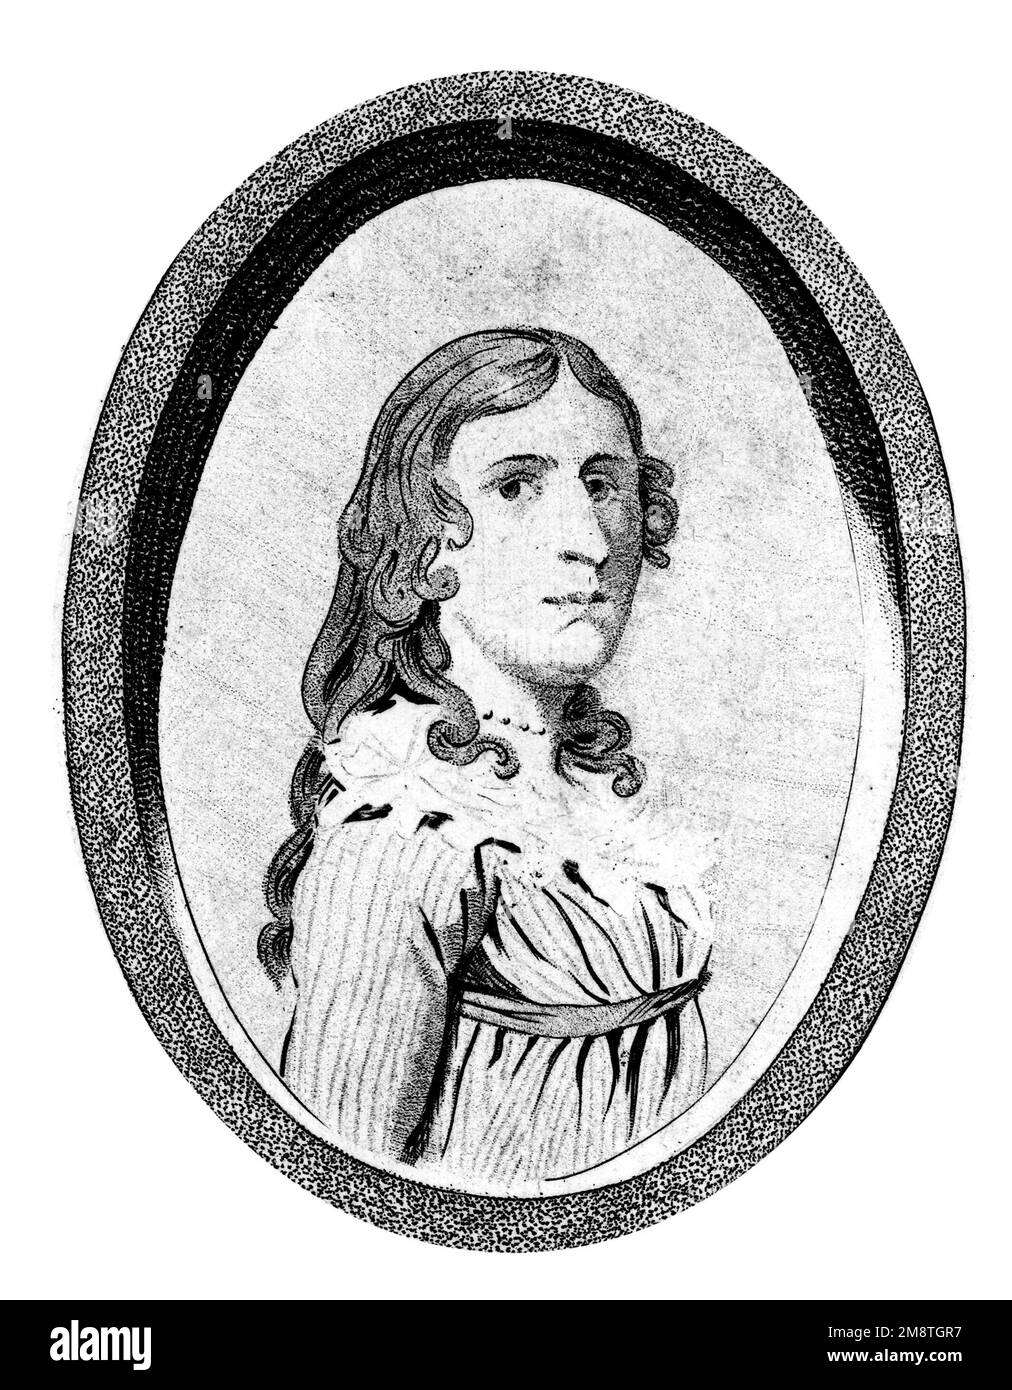 Portrait from the frontispiece of a book about the life of Deborah Sampson. Deborah Sampson Gannett (1760-1827) was a woman who disguised herself as a man, Robert Shirtliff, in order to join the Continental Army. Stock Photo